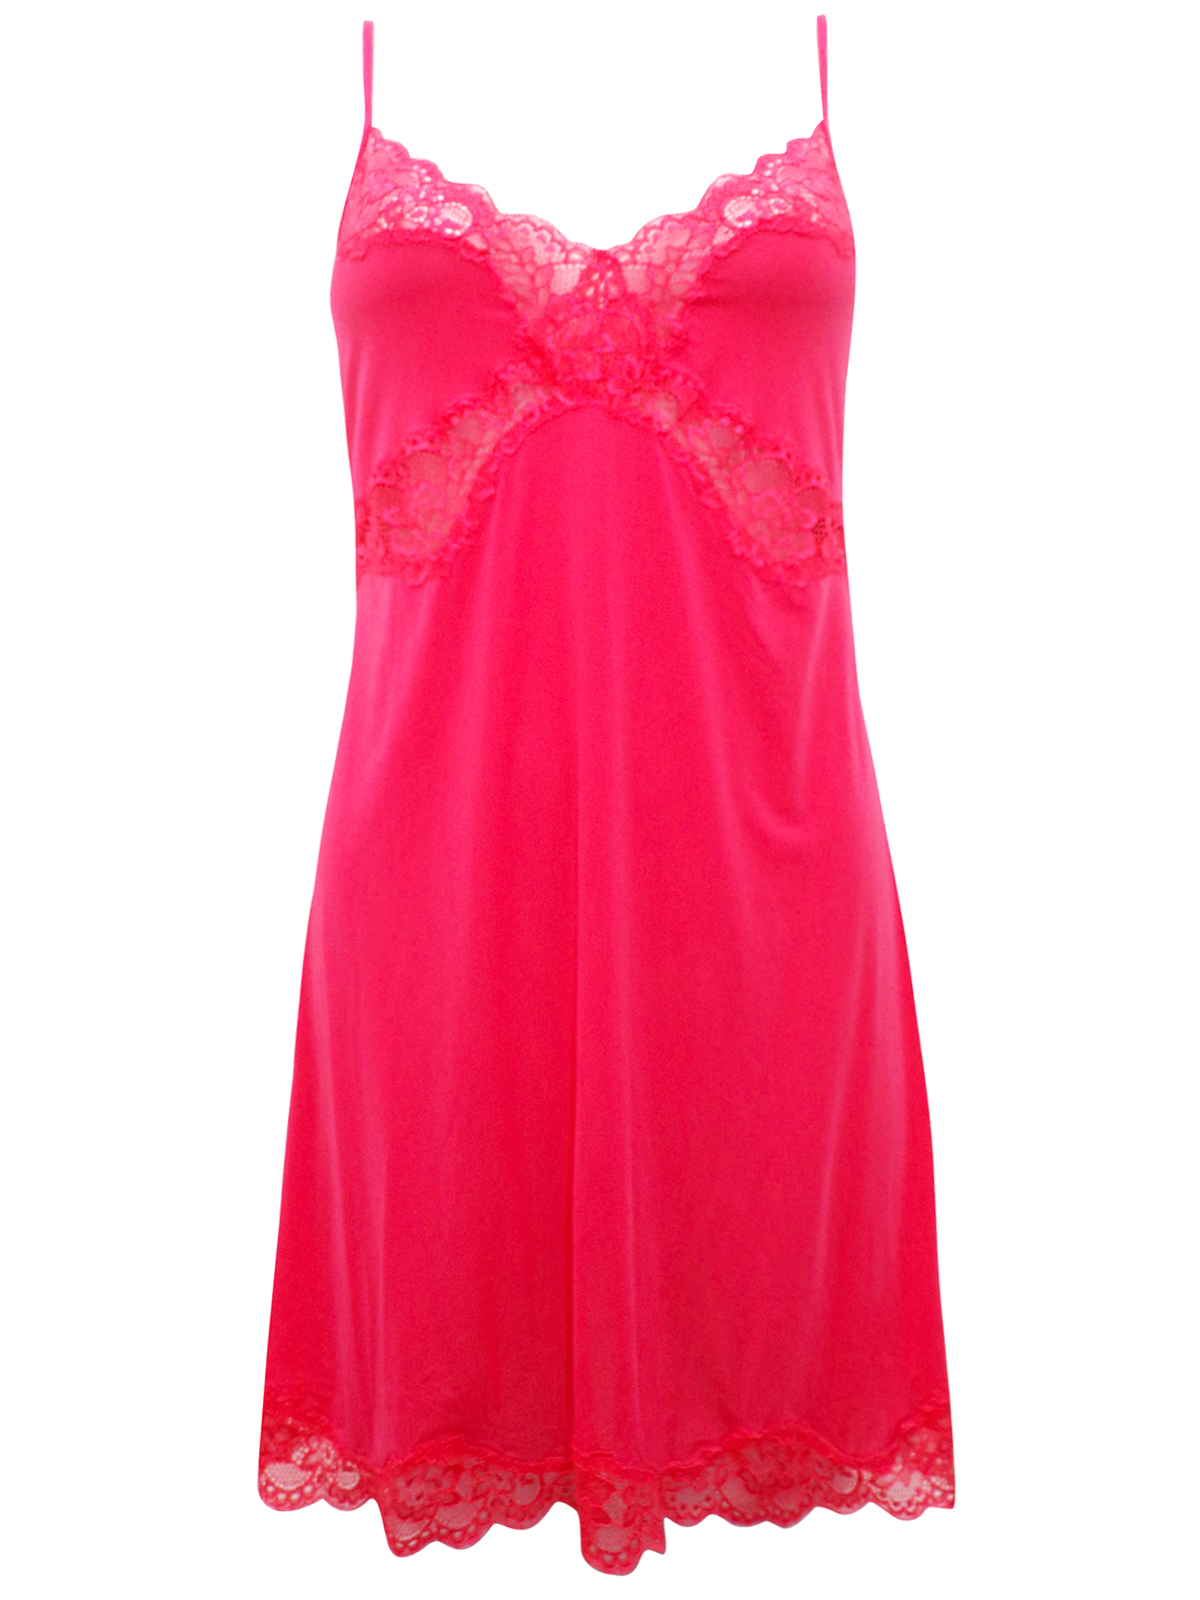 Marks and Spencer - - M&5 ASSORTED Nightdresses - Size 12 to 16